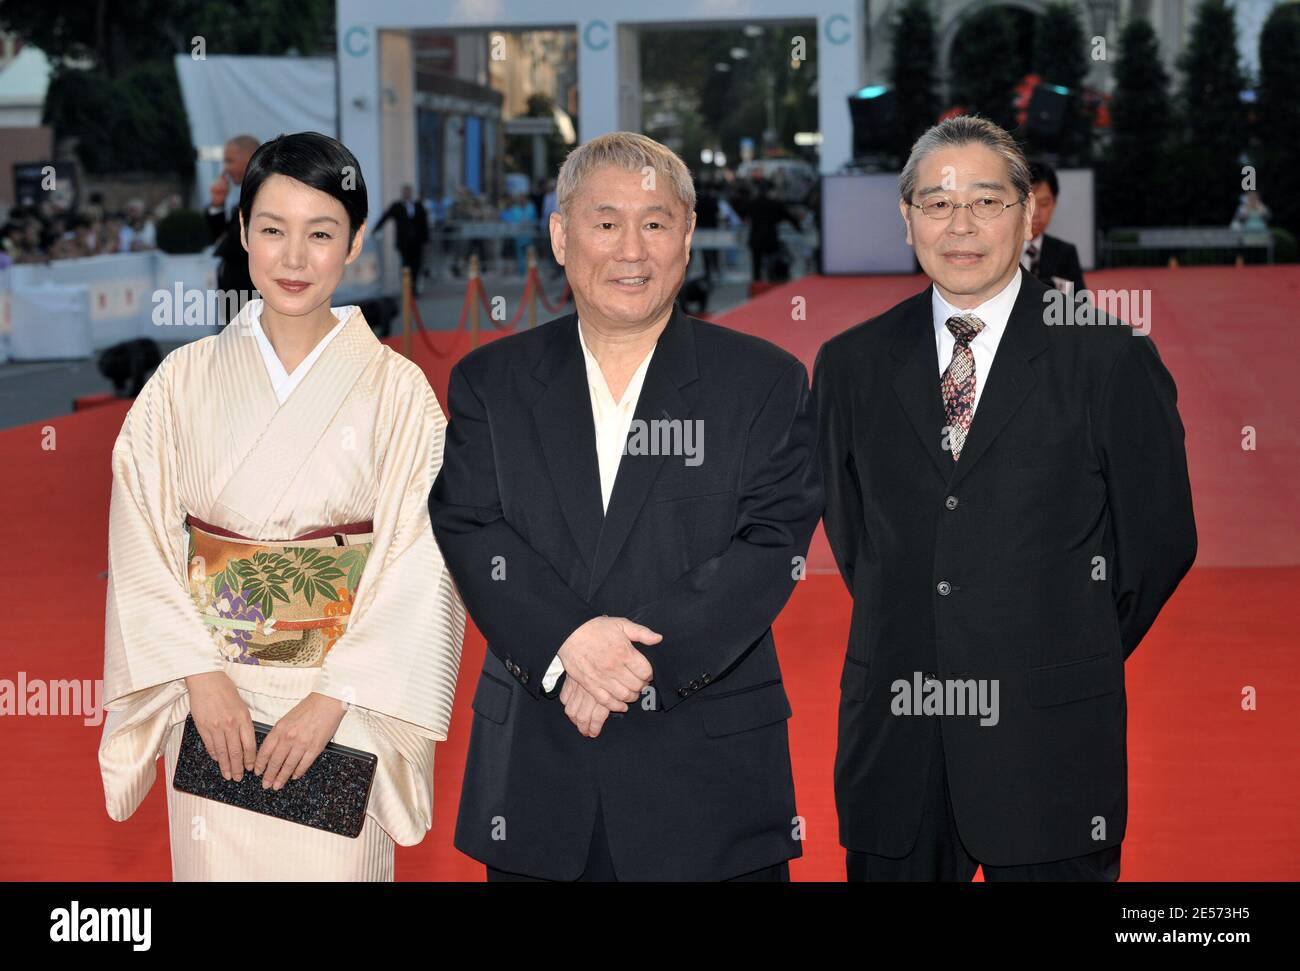 Actress Kanako Higuchi, director Takeshi Kitano and producer Masayuki Mori arrive at the 'Achilles and the Tortoise' screening during the 65th Mostra Venice Film Festival at Sala Grande in Venice, Italy on August 28, 2008. Photo by Thierry Orban/ABACAPRESS.COM Stock Photo